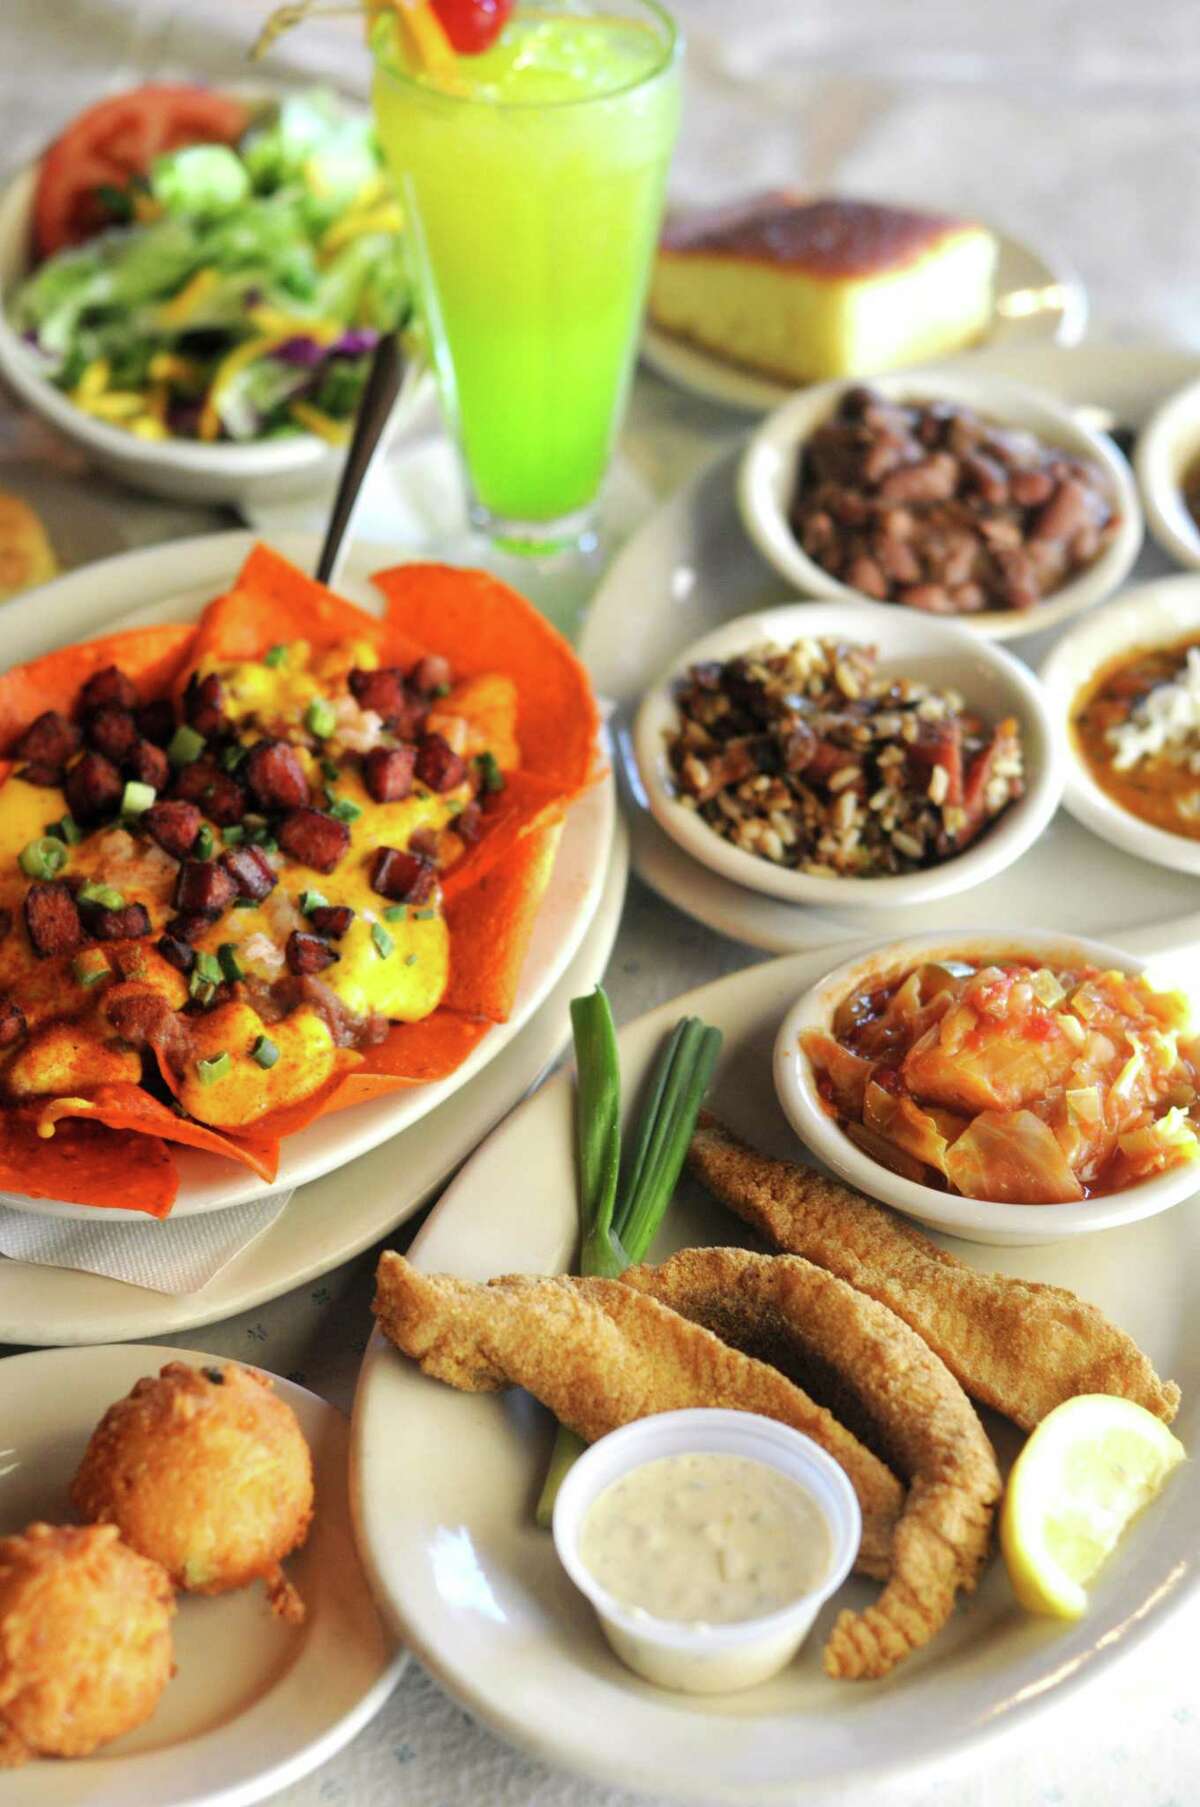 A selection of Louisiana-inspired classics at Acadiana Café including (clockwise from front) fried catfish with stewed cabbage, Cajun Nachos and a sampler tray with bowls of of gumbo, red beans and rice, crawfish étouffée and jambalaya